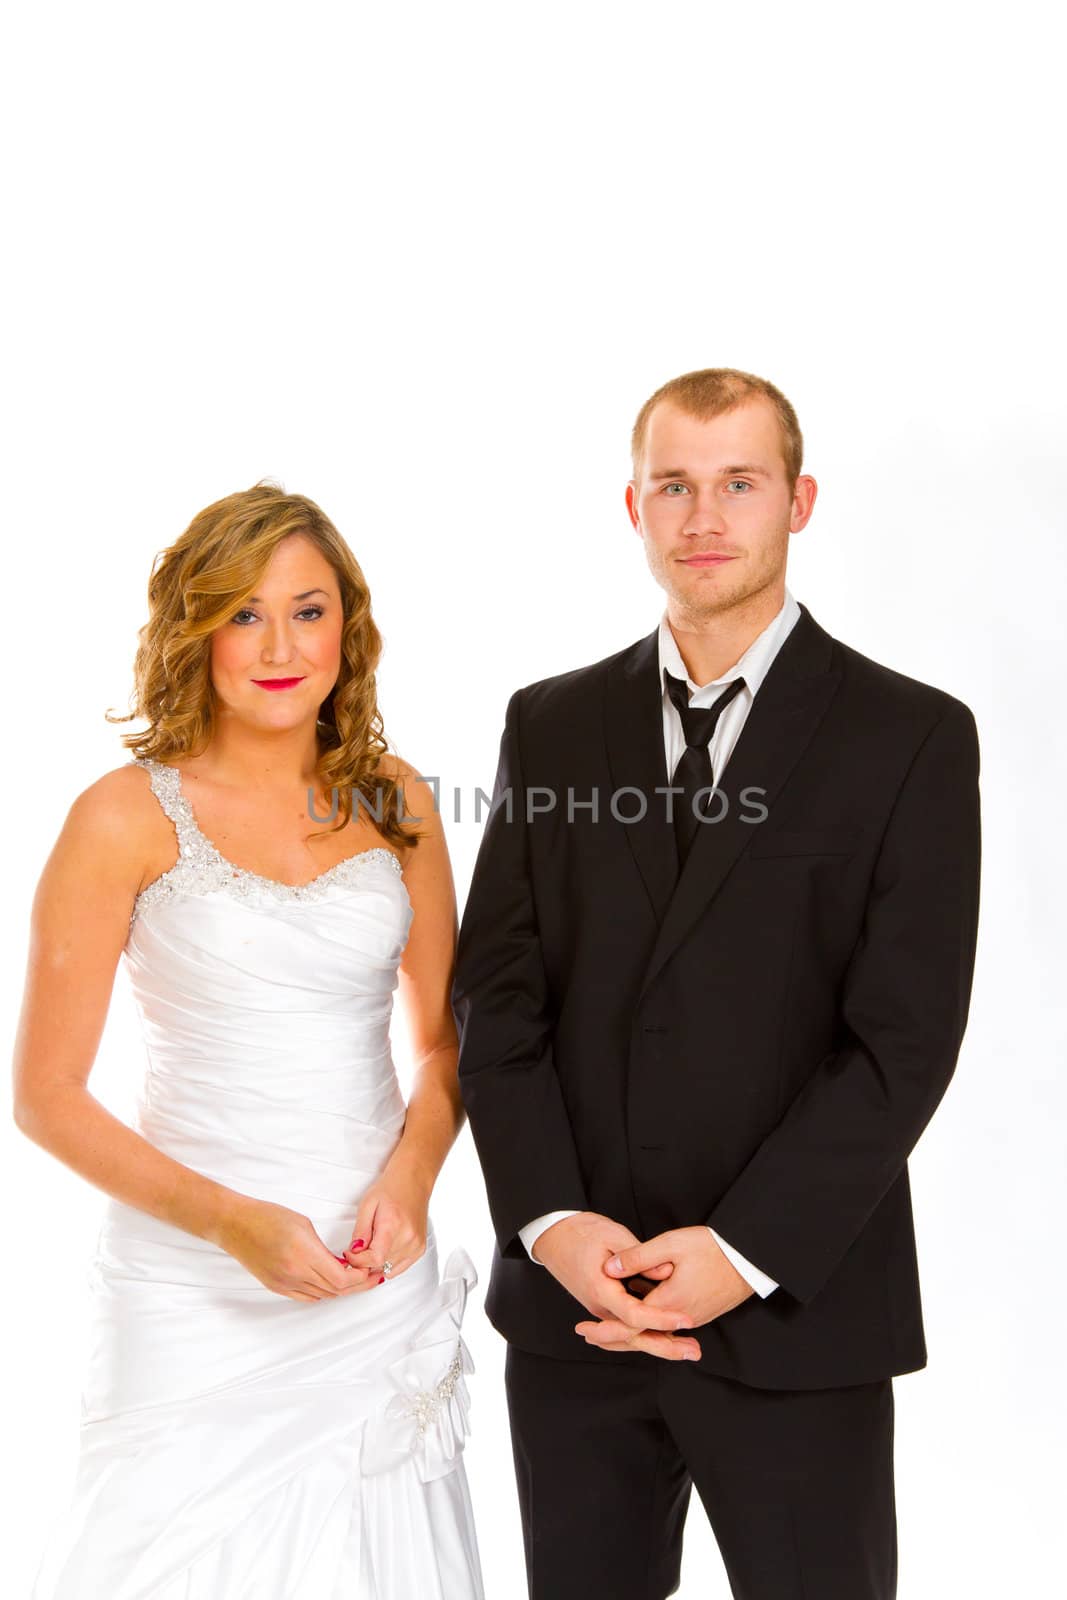 A beautiful bride and a handsome groom are isolated against a white background in the studio to create this bridal wedding portrait.